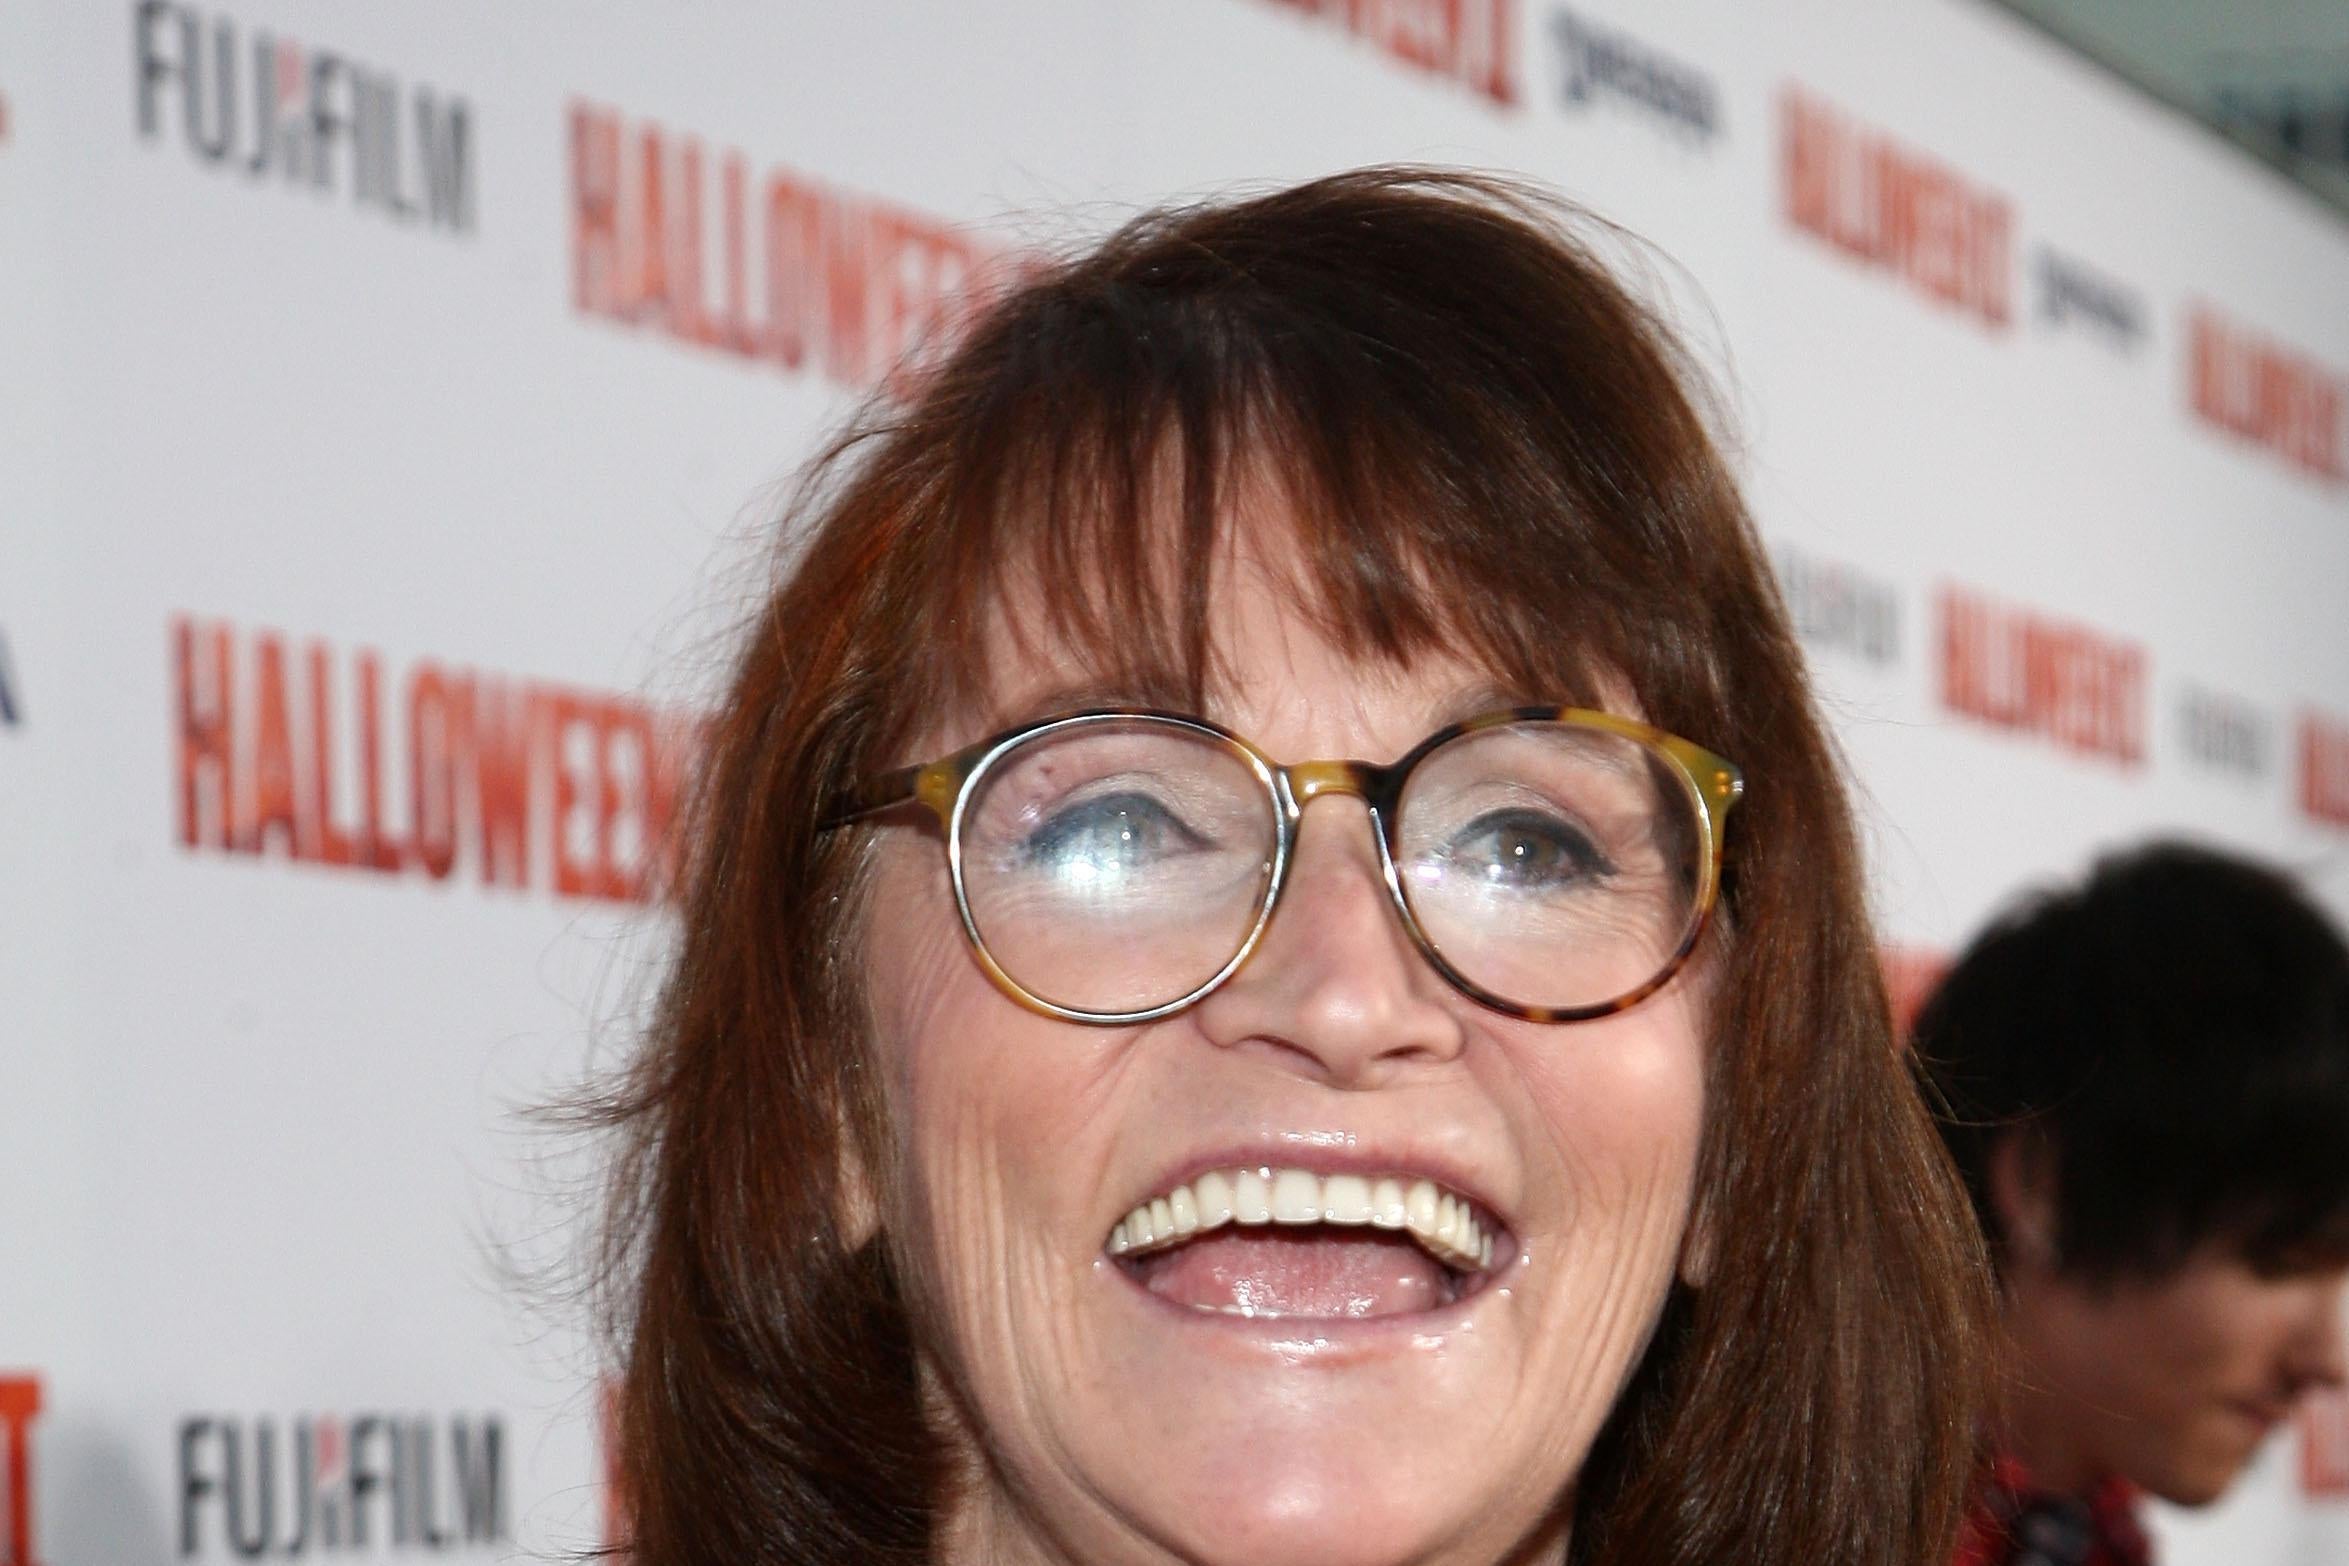 Actress Margot Kidder arrives at the premiere of Dimension Films' 'Halloween II' held at Grauman's Chinese Theater on August 24, 2009 in Hollywood, California.